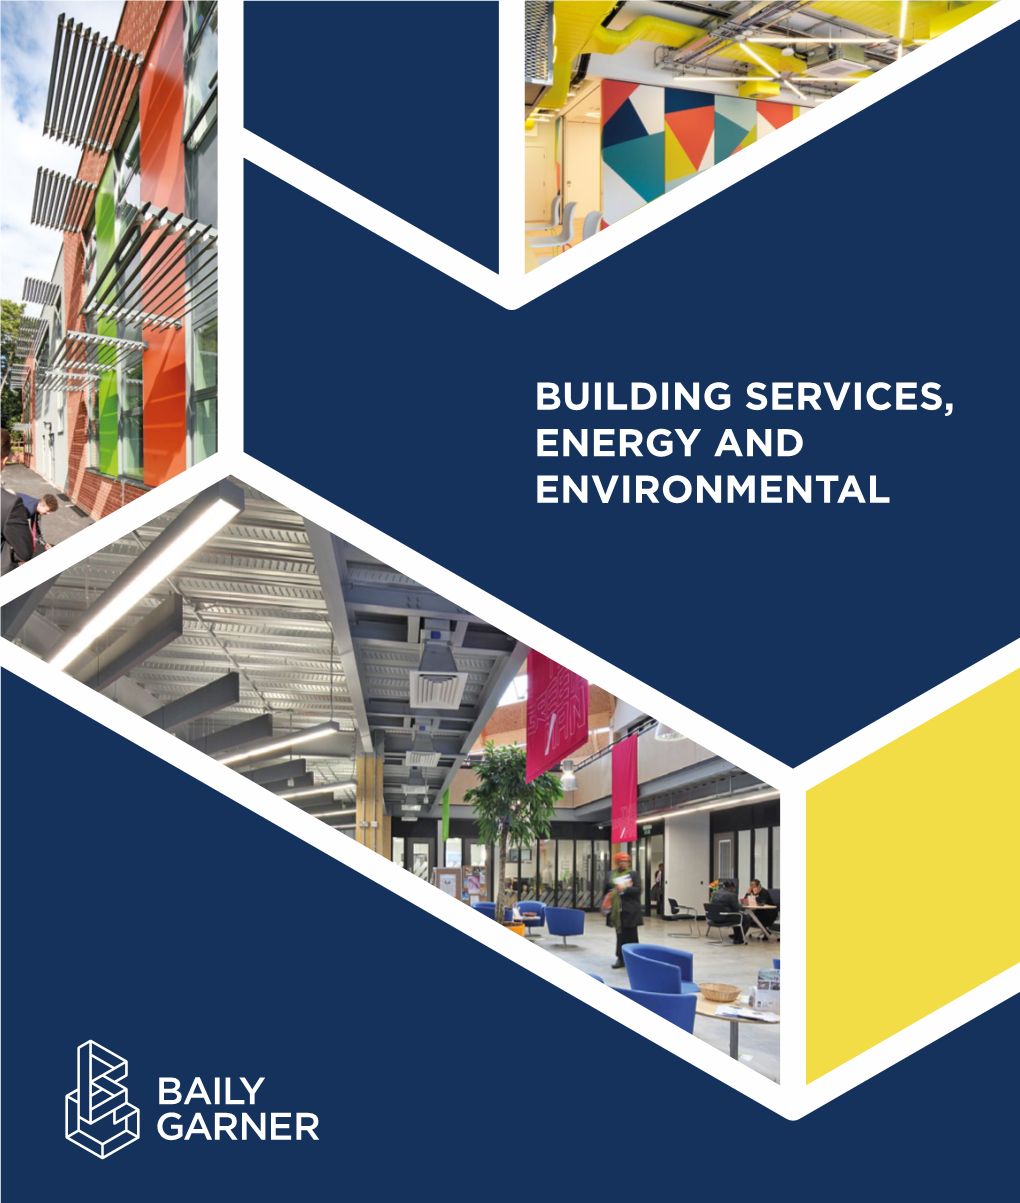 Building Services, Energy and Environmental 2 1 Building Services, Energy and Environmental